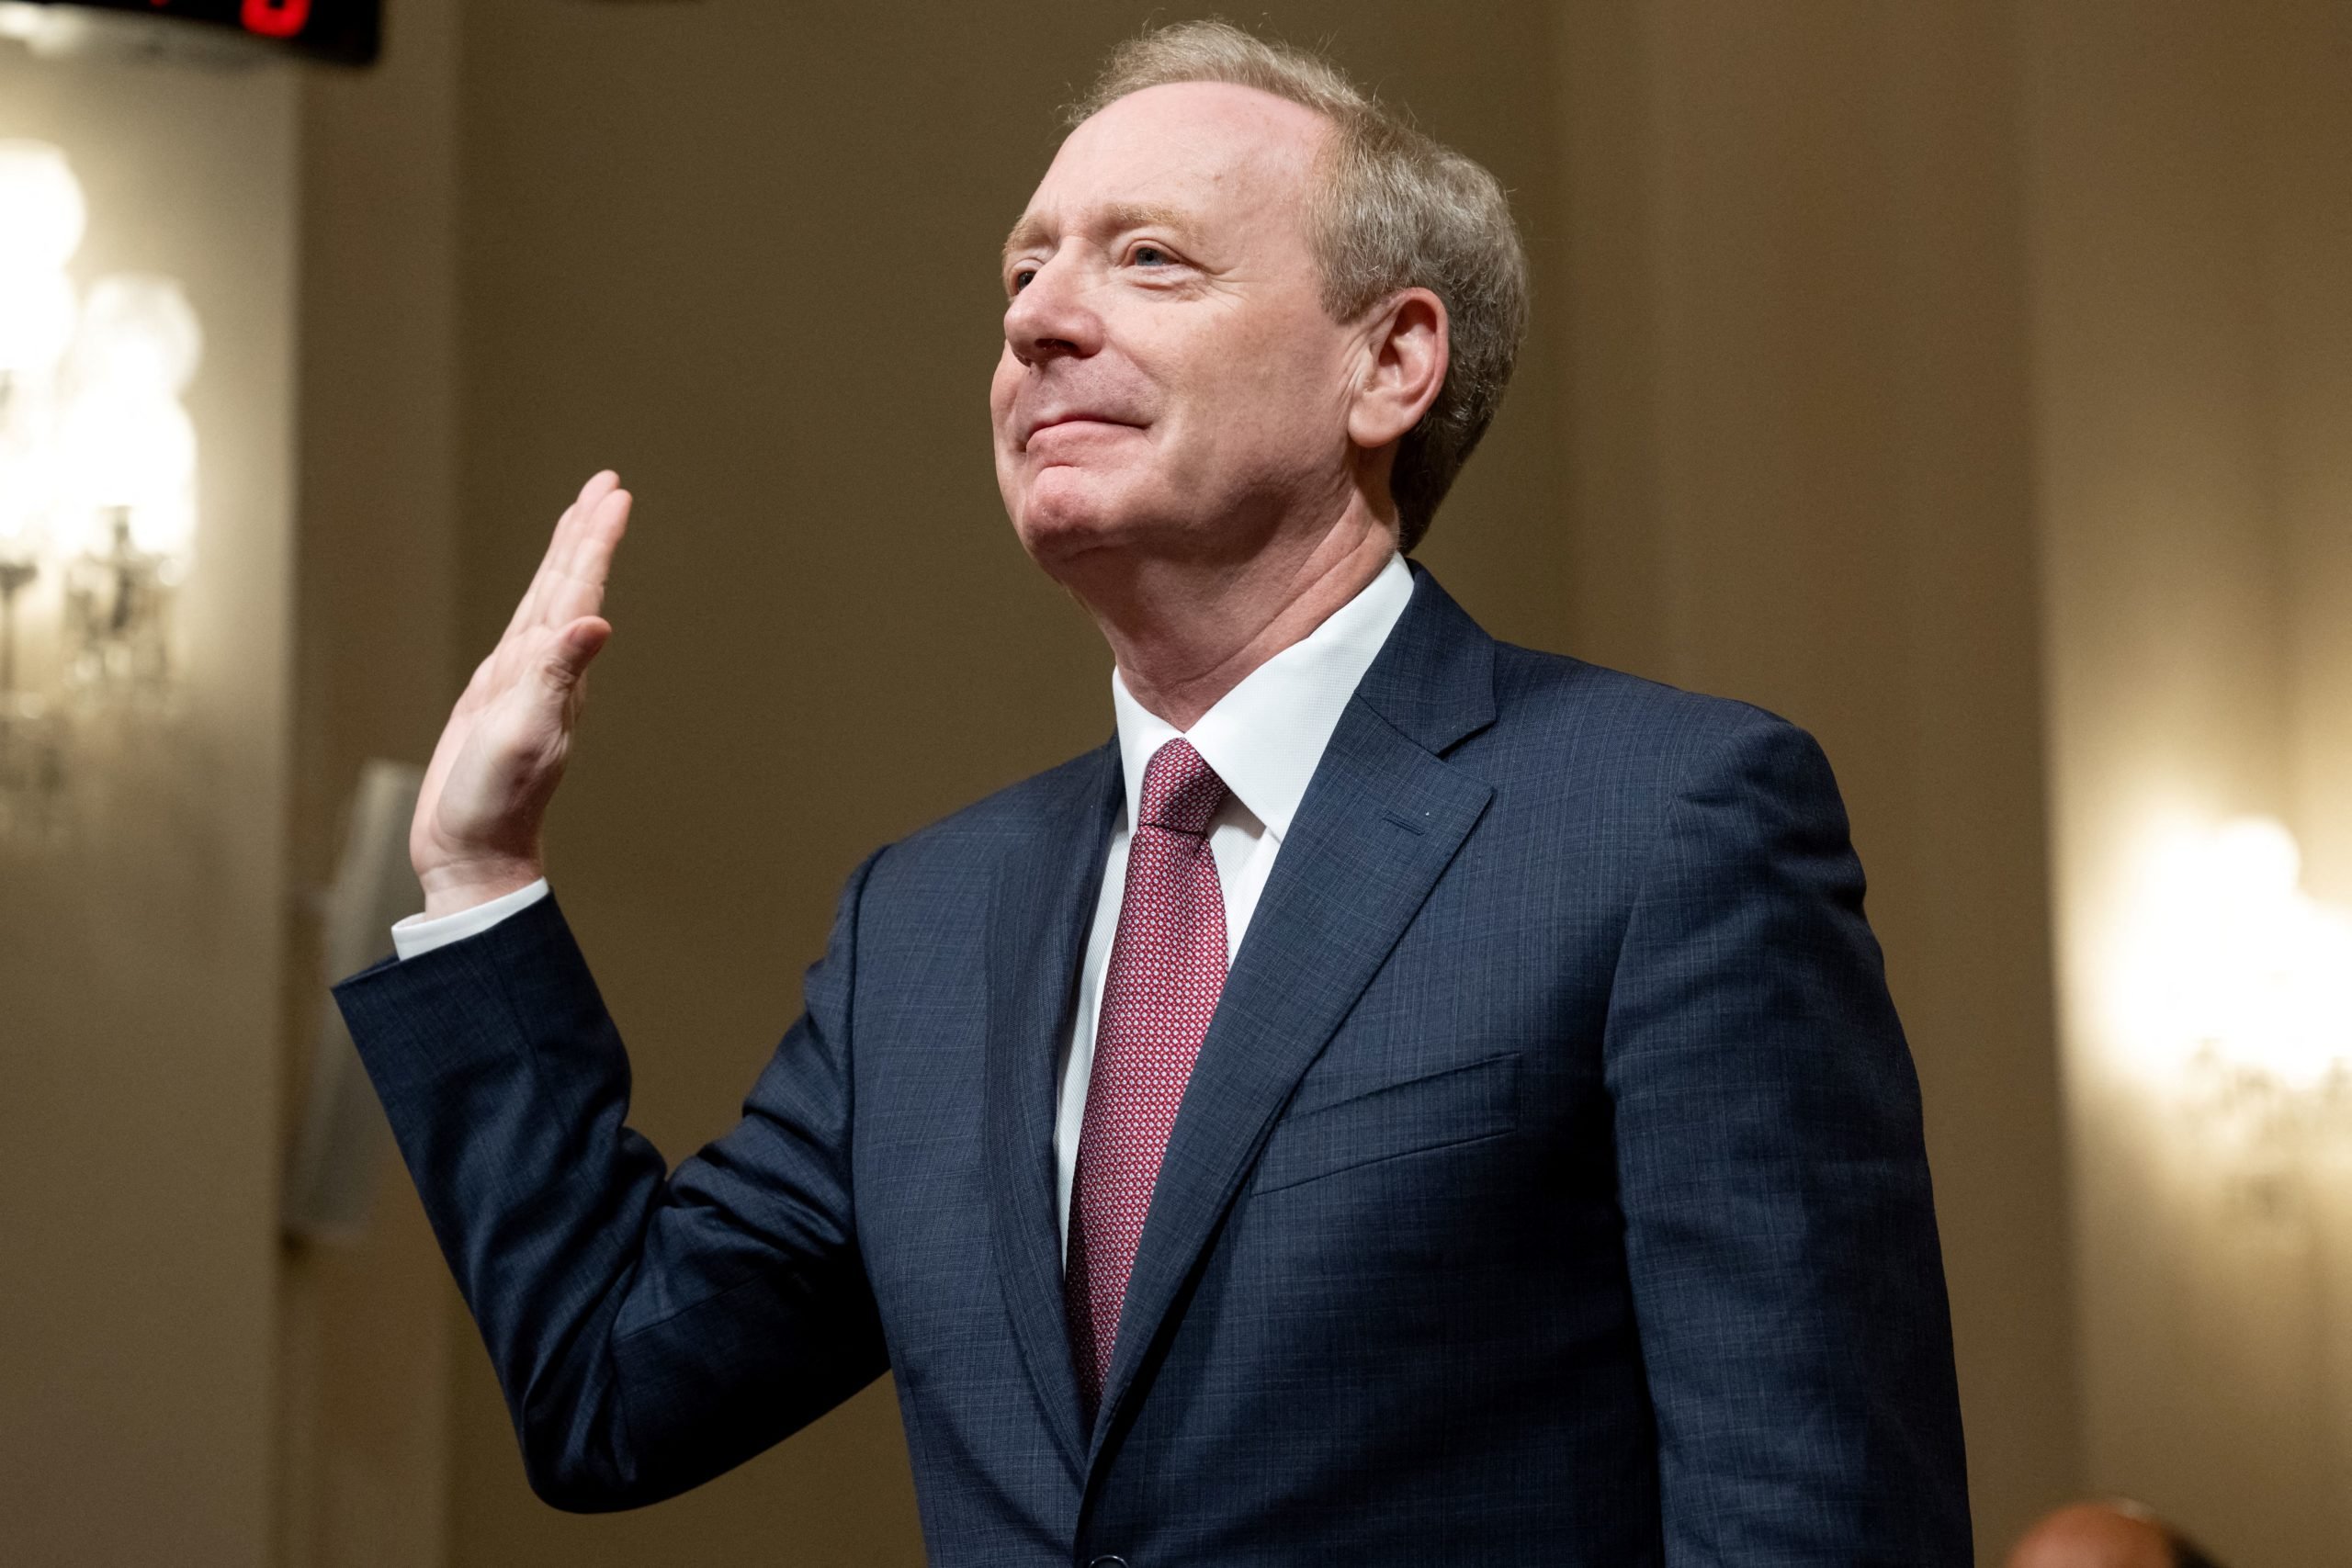 Brad Smith, Vice Chairman and President of Microsoft, is sworn in before testifying about Microsoft's cybersecurity work during a House Committee on Homeland Security hearing on Capitol Hill in Washington, DC, on June 13, 2024. (Photo by SAUL LOEB/AFP via Getty Images)